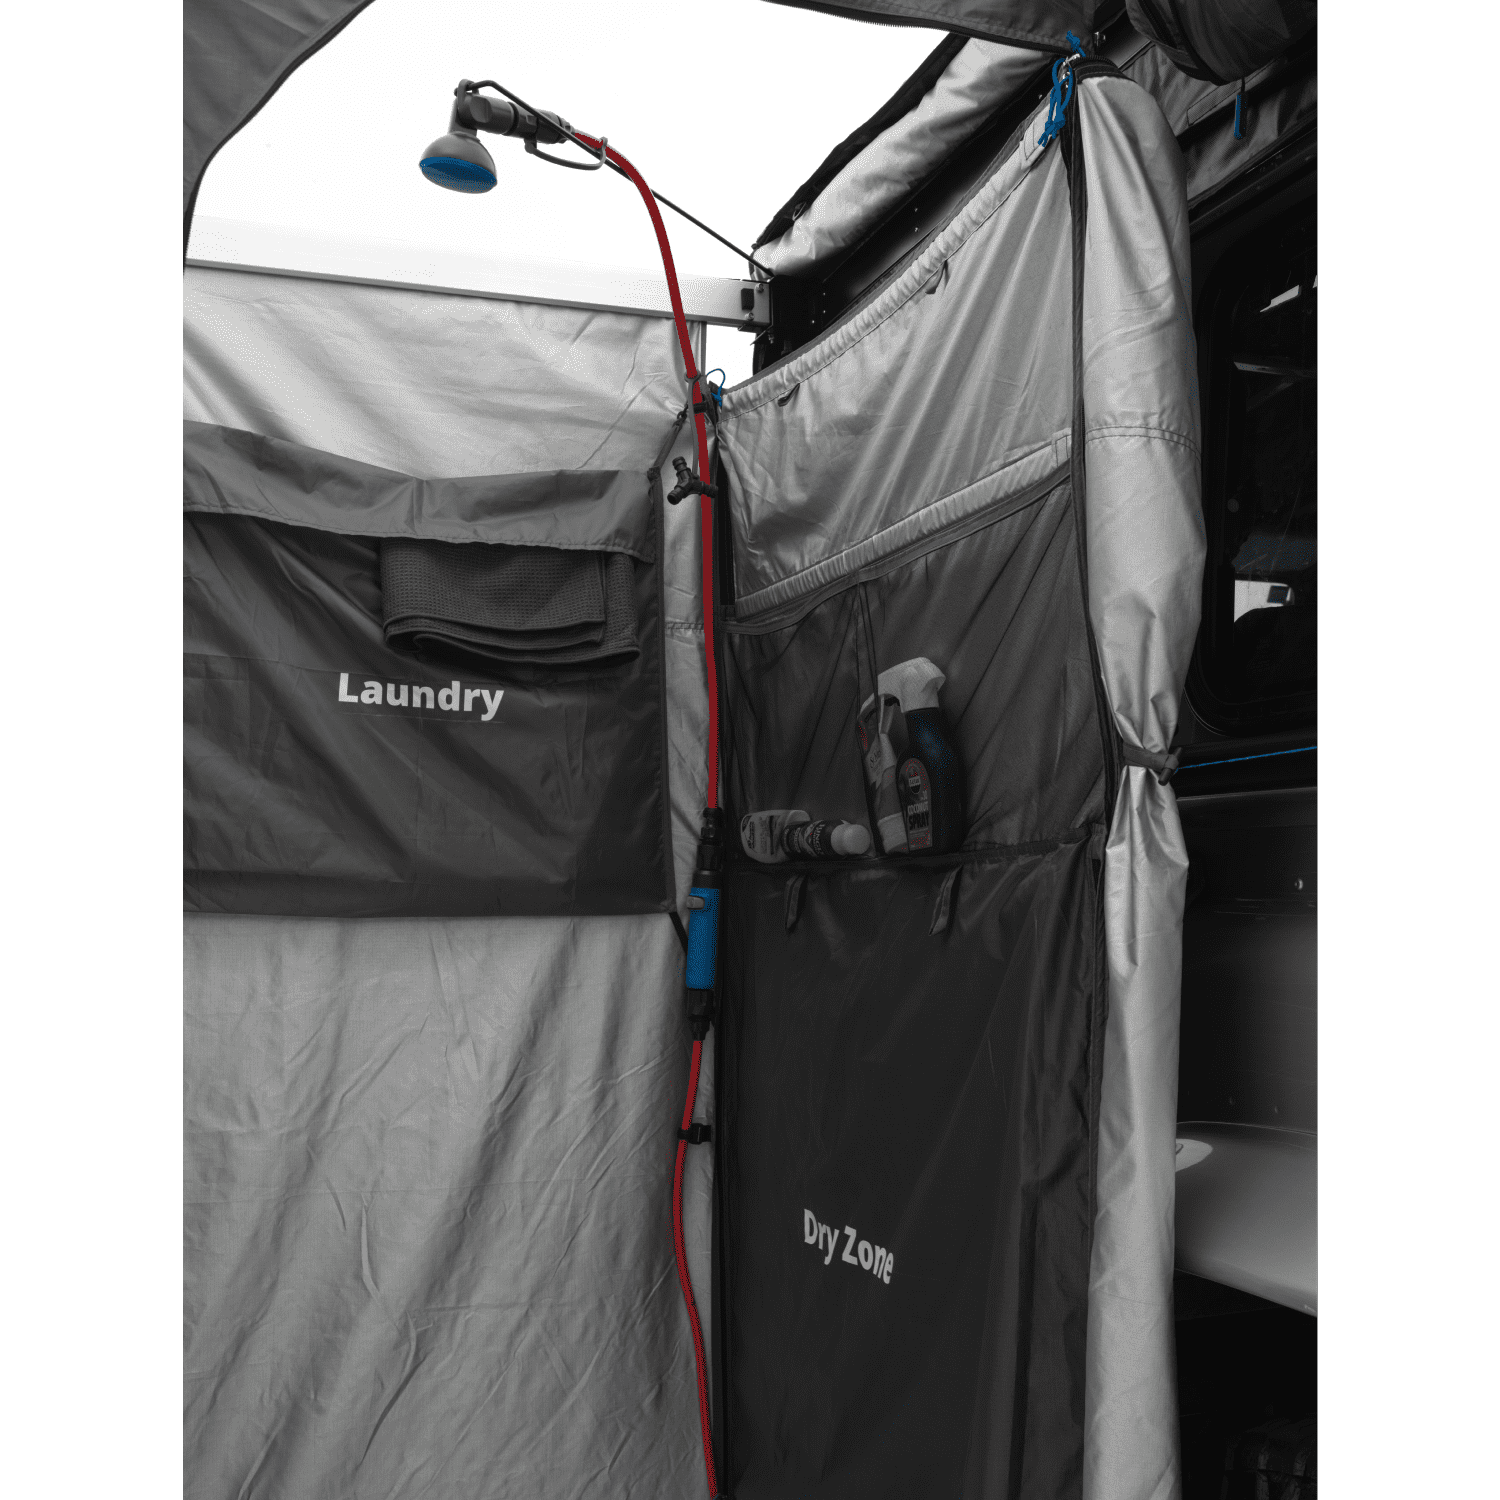 Internal view of a mounted shower tent, displaying the text 